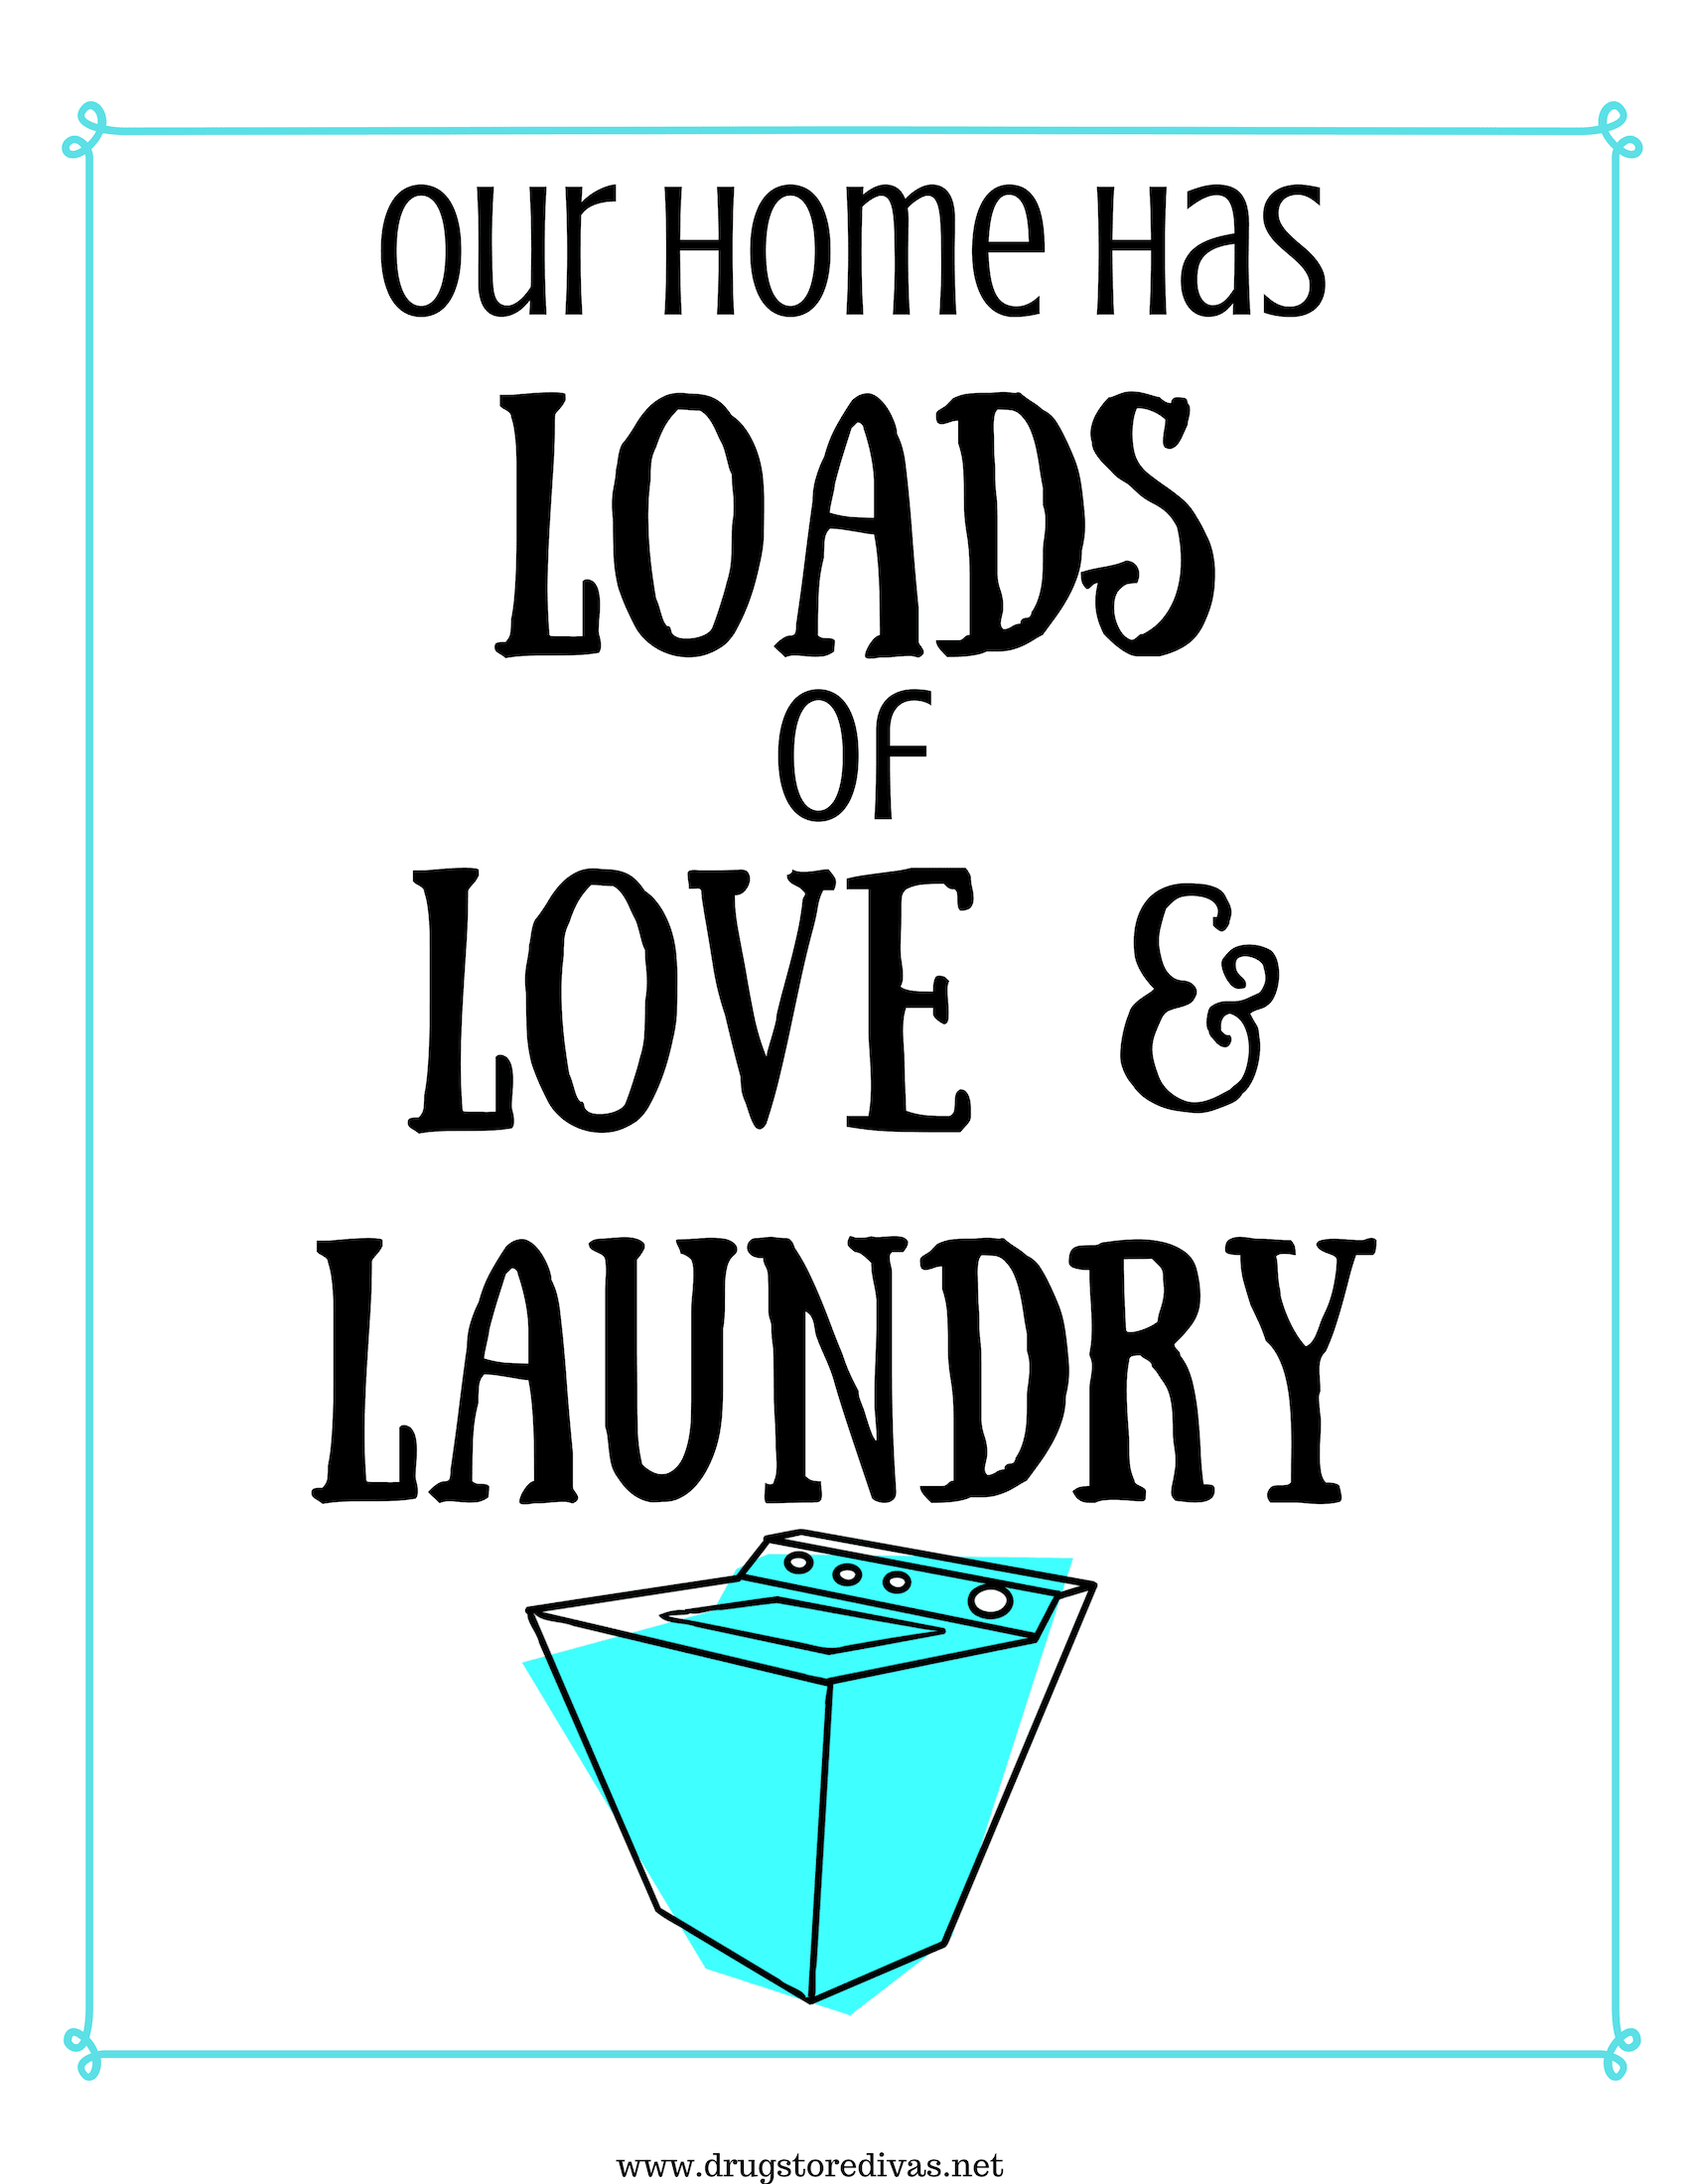 Add a little pizzazz to your home with this DIY Laundry Room Wall Art. It comes with a free printable too at www.drugstoredivas.net.